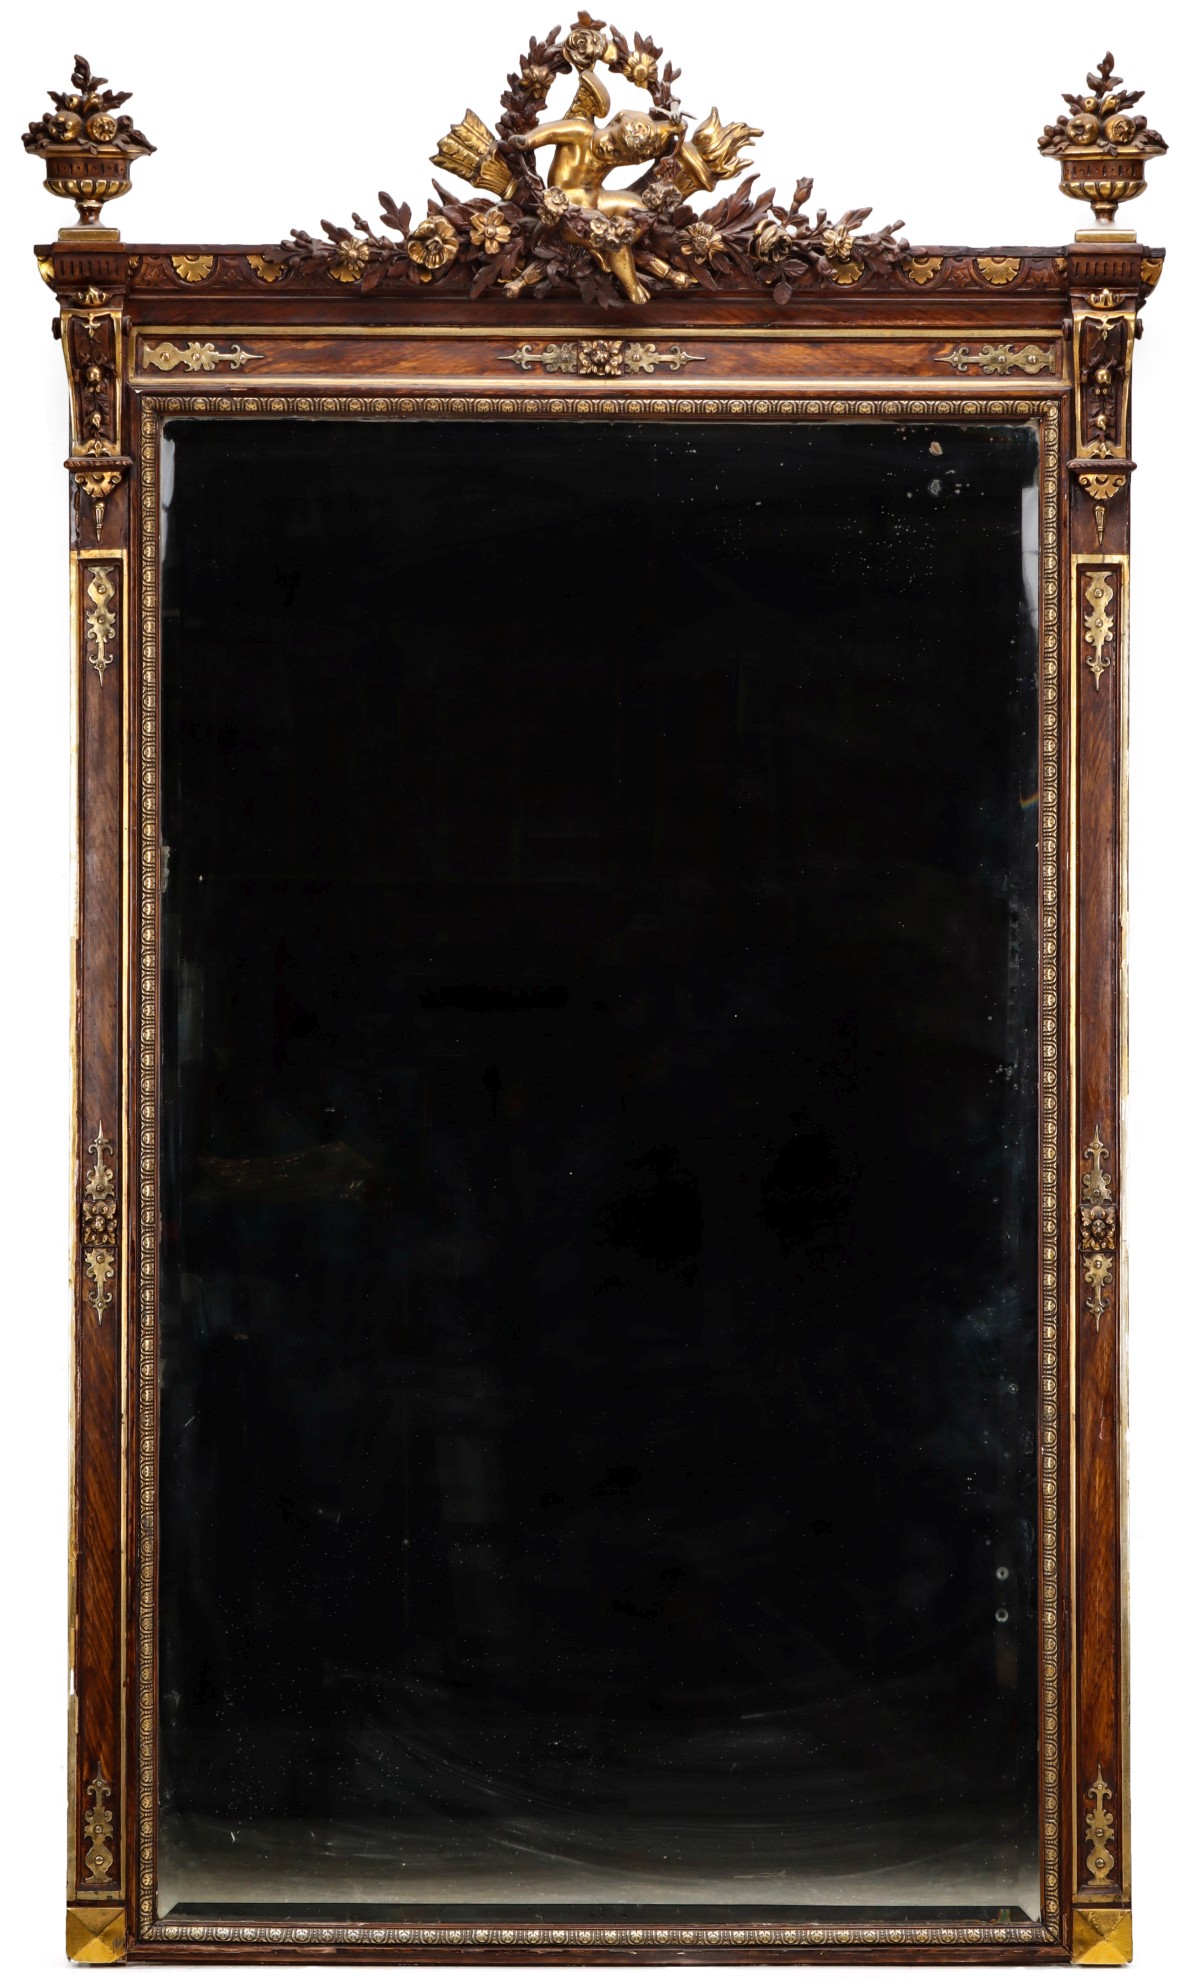 A MID TO LATE 19TH C. REGENCY STYLE OVER MANTEL MIRROR